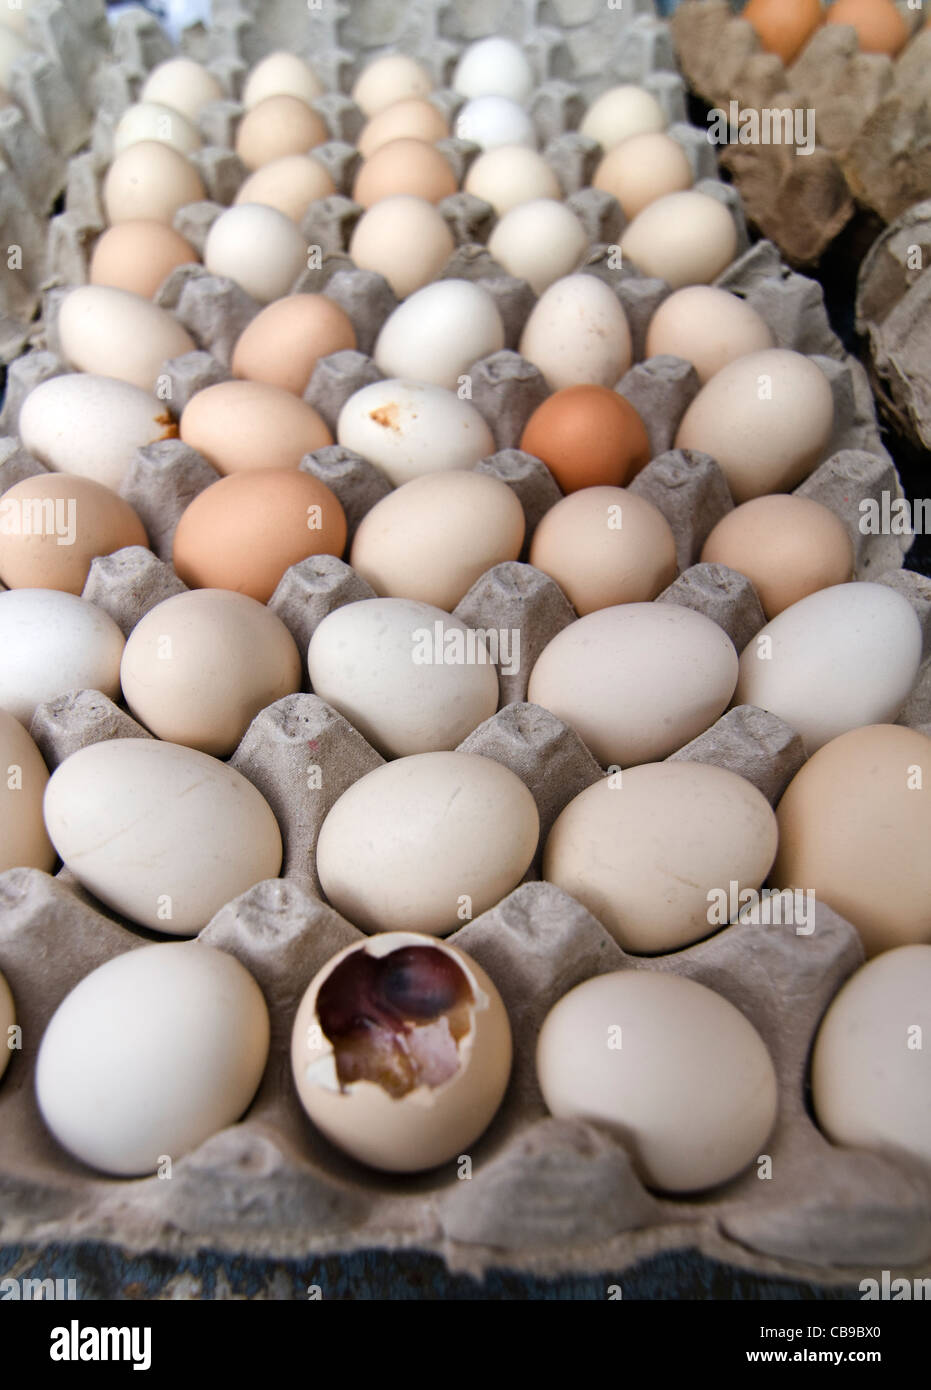 Fertilized duck eggs (Balut or Maodan) sold in a market in China. This high protein egg is very popular in Asia. Stock Photo